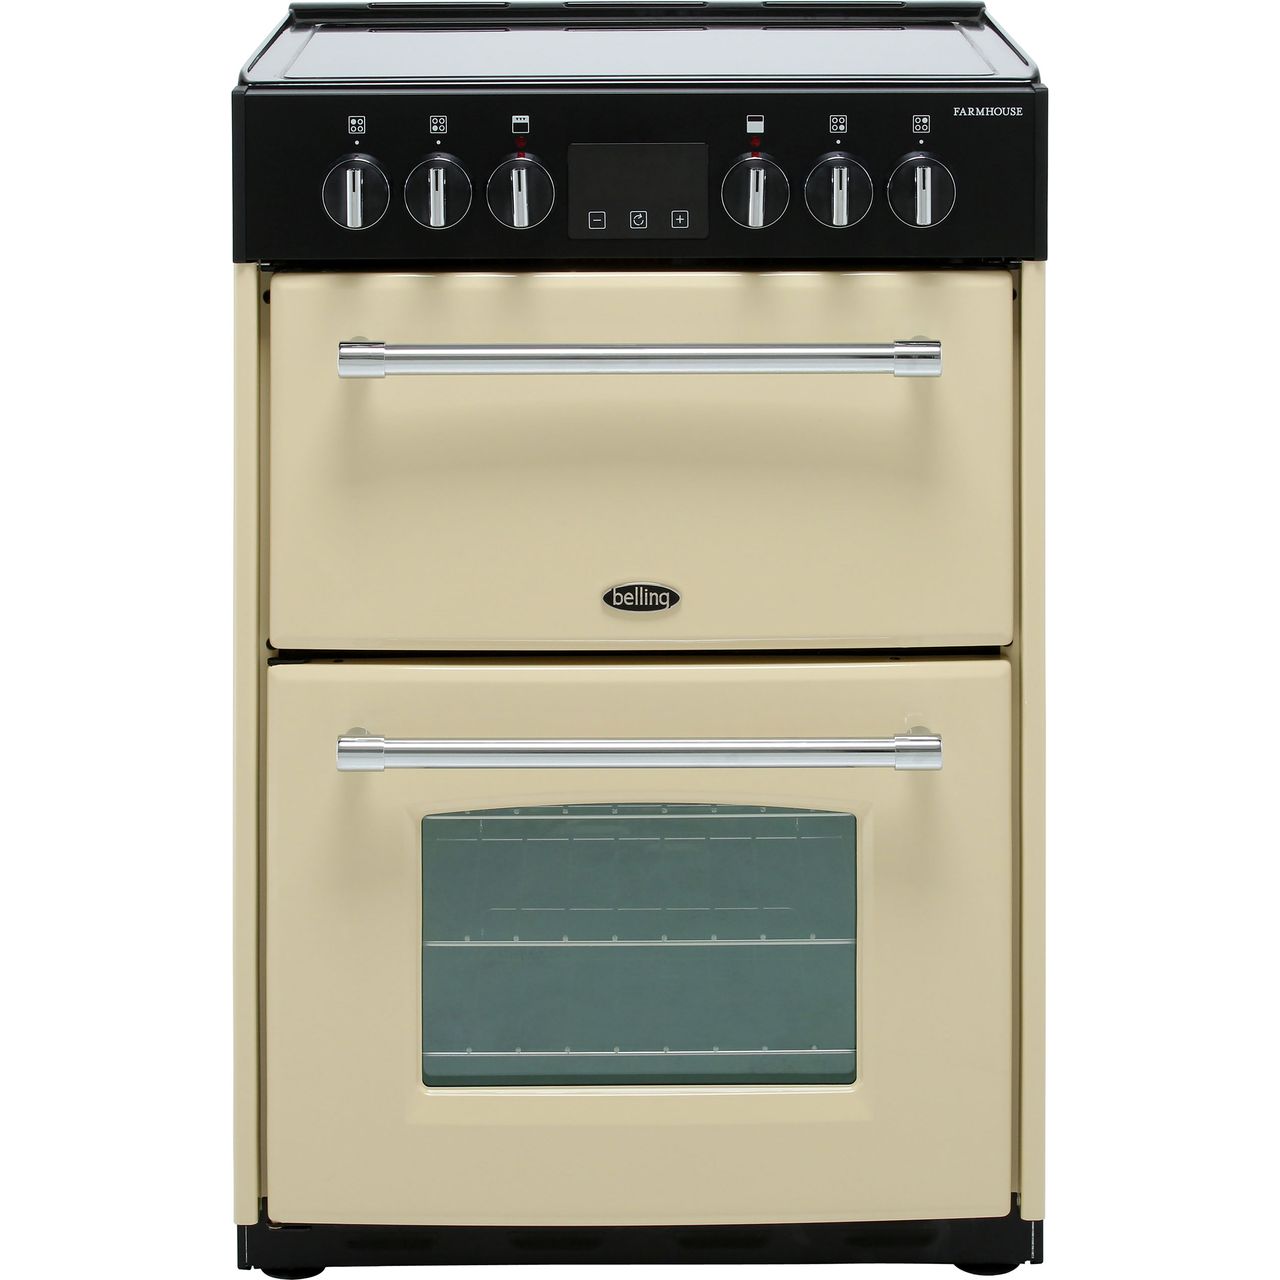 belling electric cooker